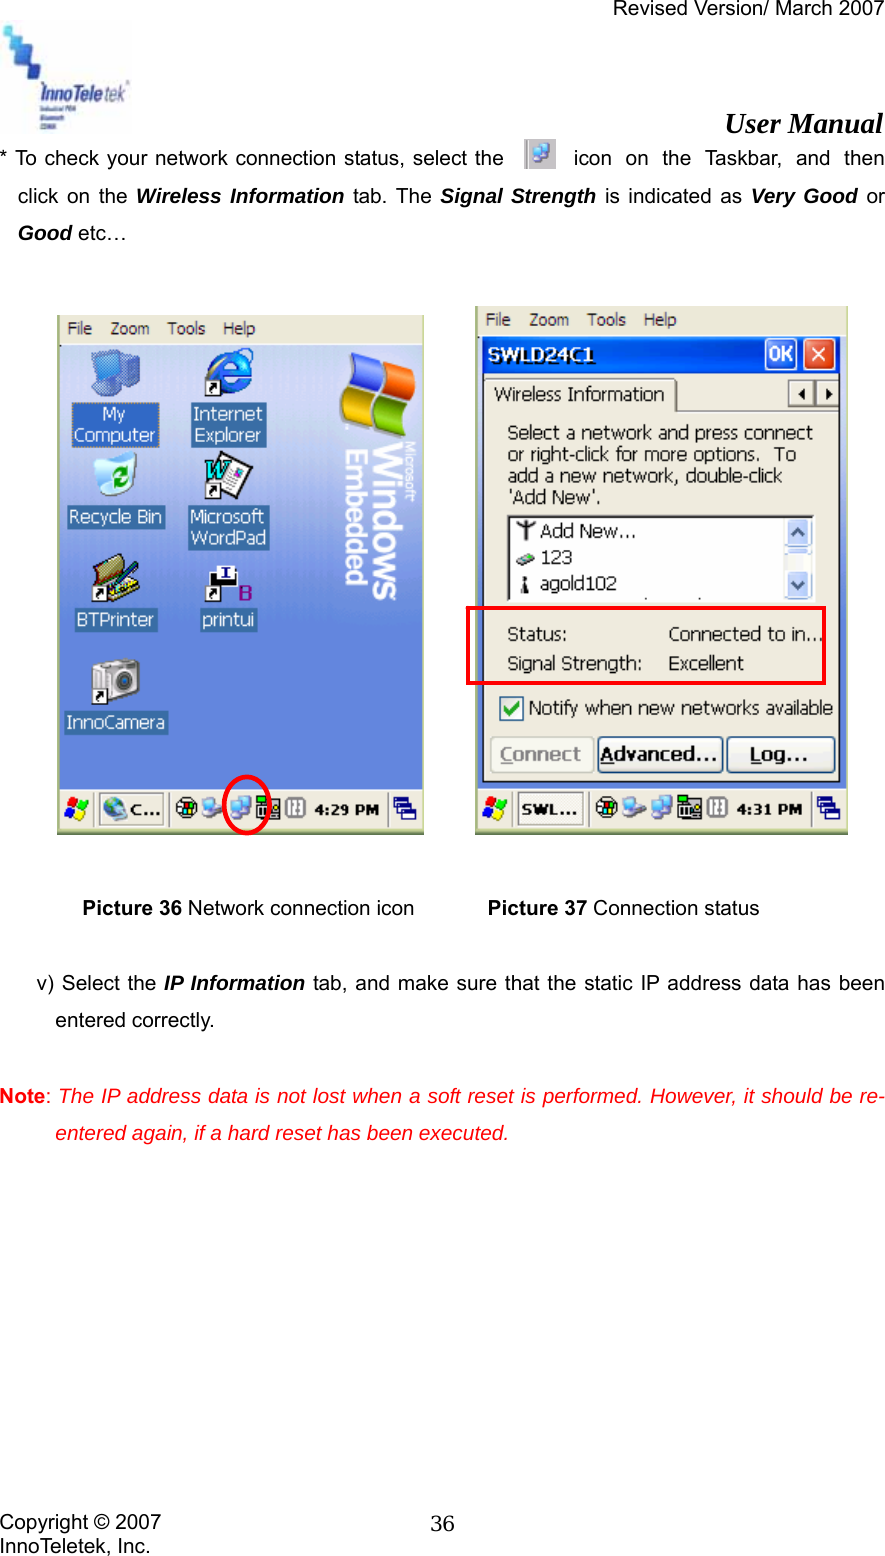 Revised Version/ March 2007                                                          User Manual Copyright © 2007 InnoTeletek, Inc.  36* To check your network connection status, select the           icon  on  the  Taskbar,  and  then click on the Wireless Information tab. The Signal Strength is indicated as Very Good or Good etc…                Picture 36 Network connection icon       Picture 37 Connection status  v) Select the IP Information tab, and make sure that the static IP address data has been entered correctly.  Note: The IP address data is not lost when a soft reset is performed. However, it should be re-entered again, if a hard reset has been executed.          